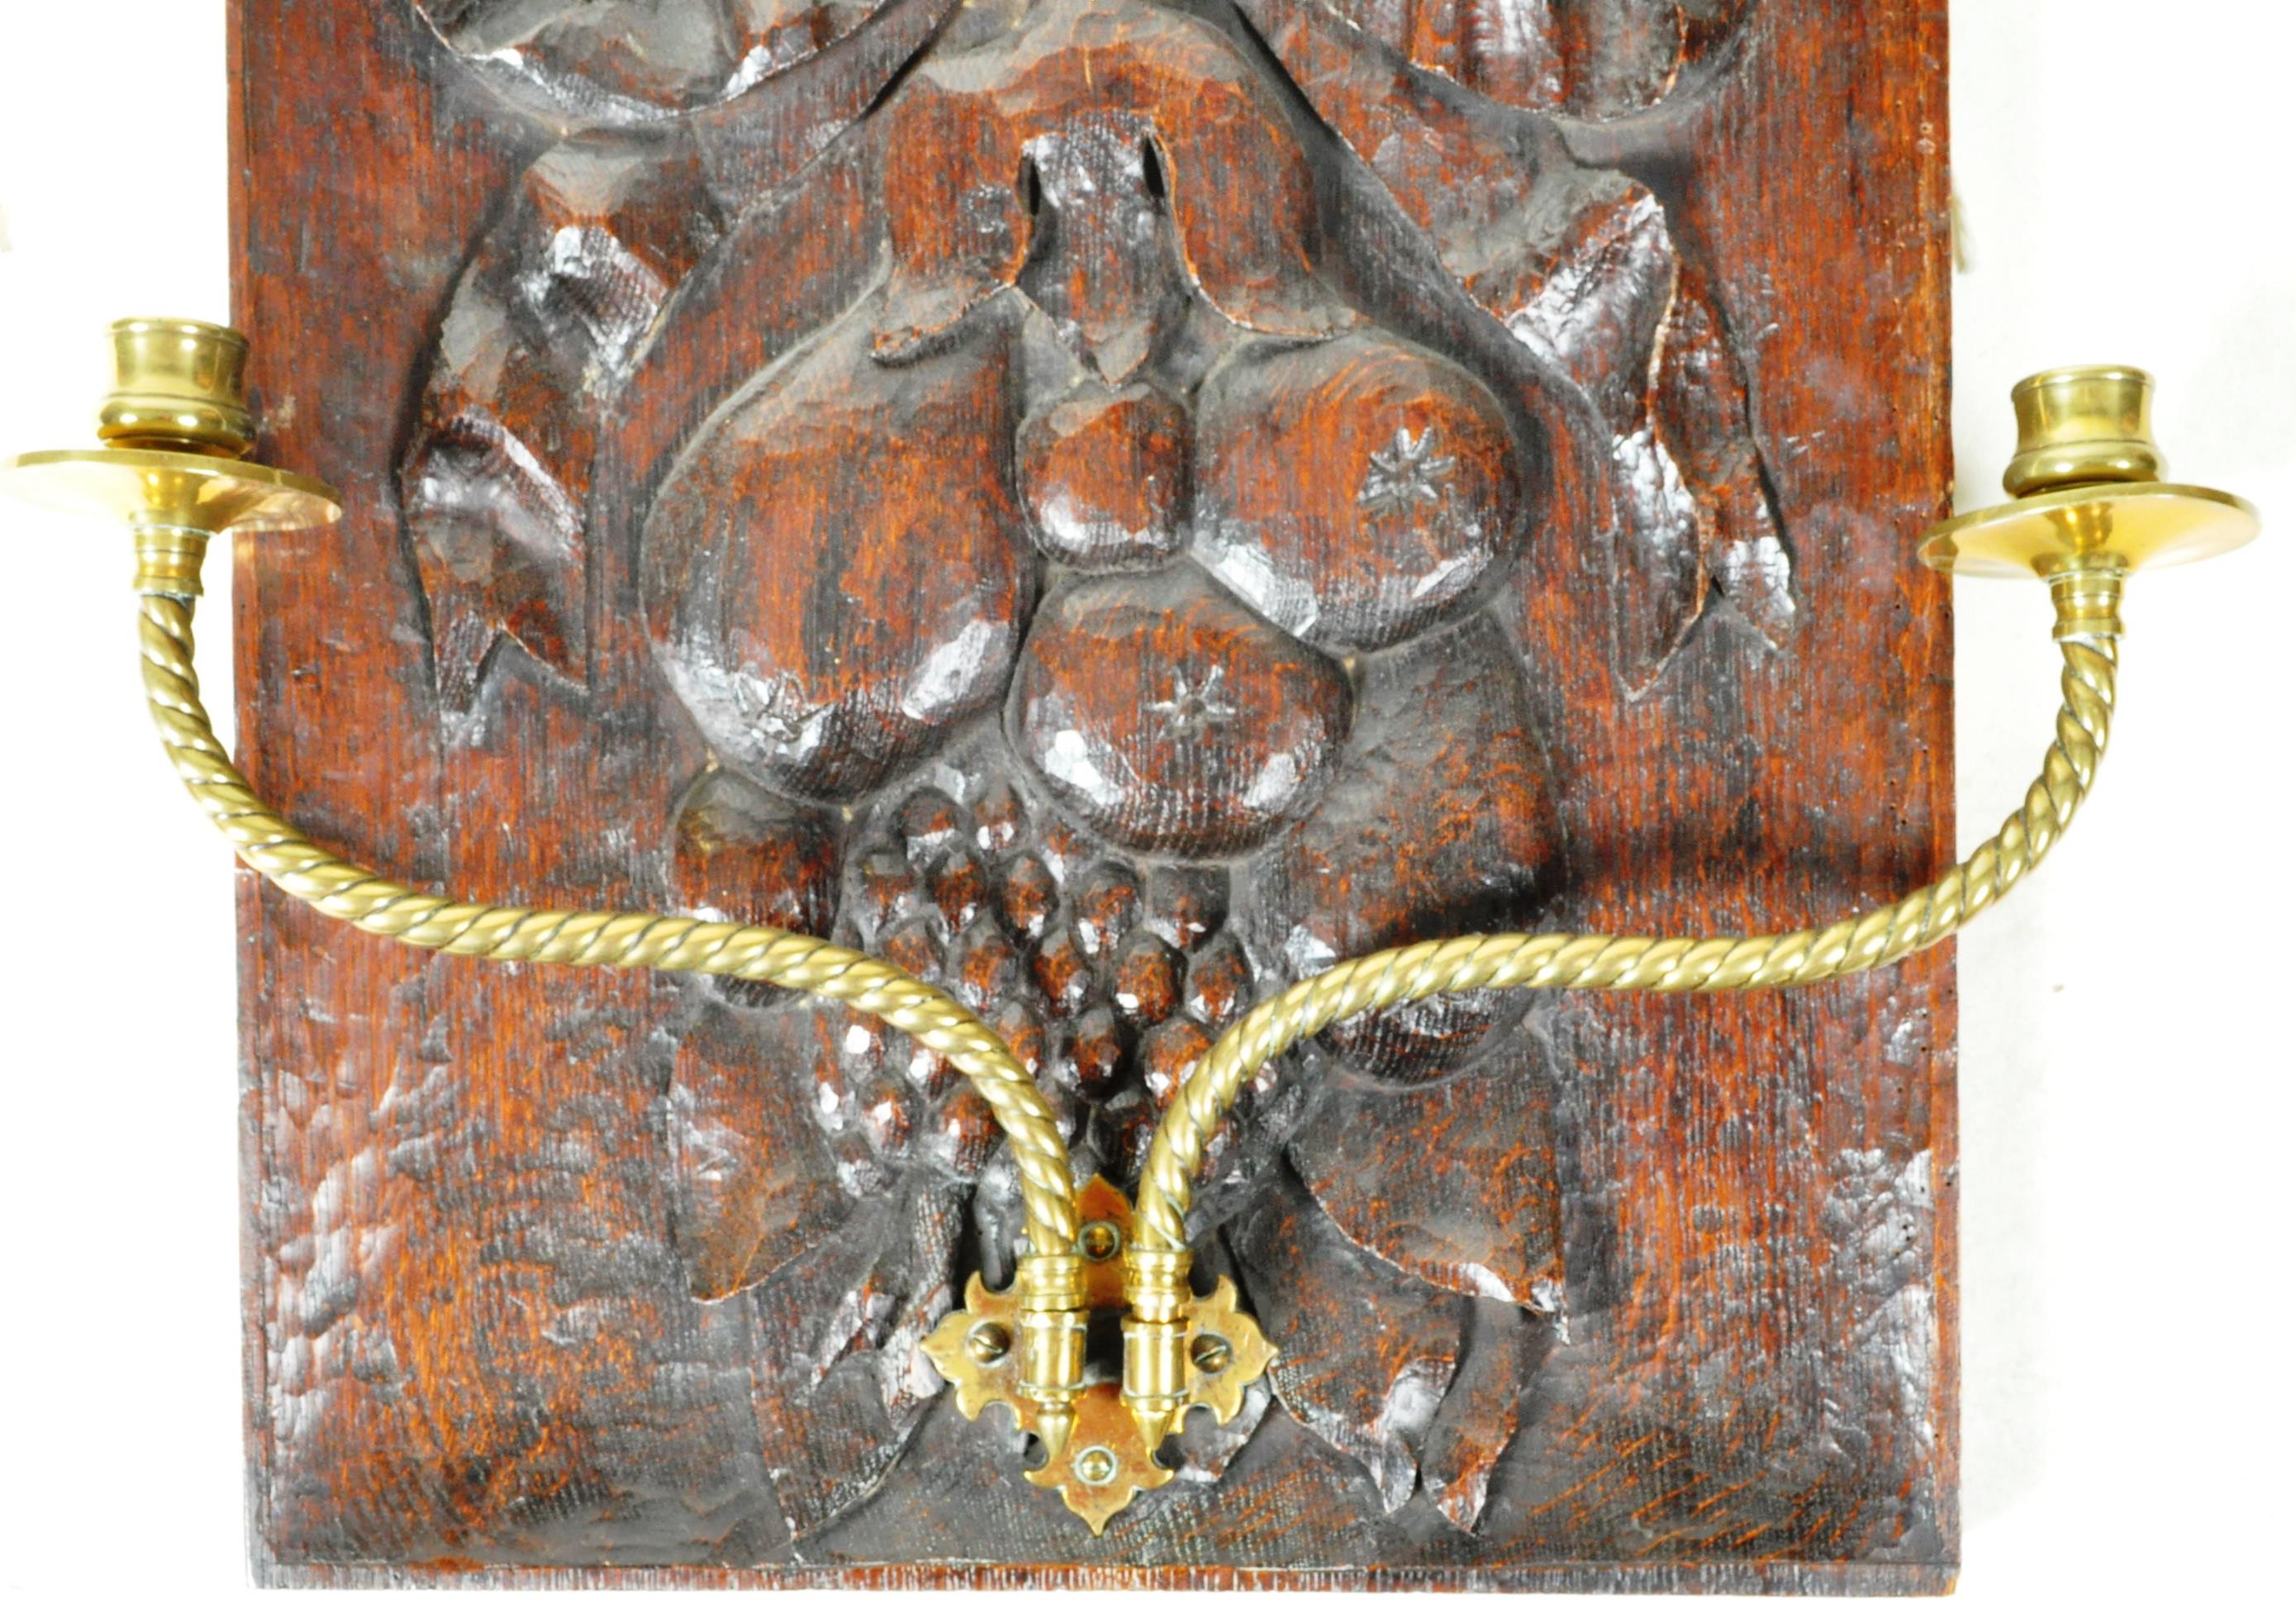 19TH CENTURY CARVED WOODEN PANEL WITH BRASS CANDLE SCONCES - Image 3 of 5